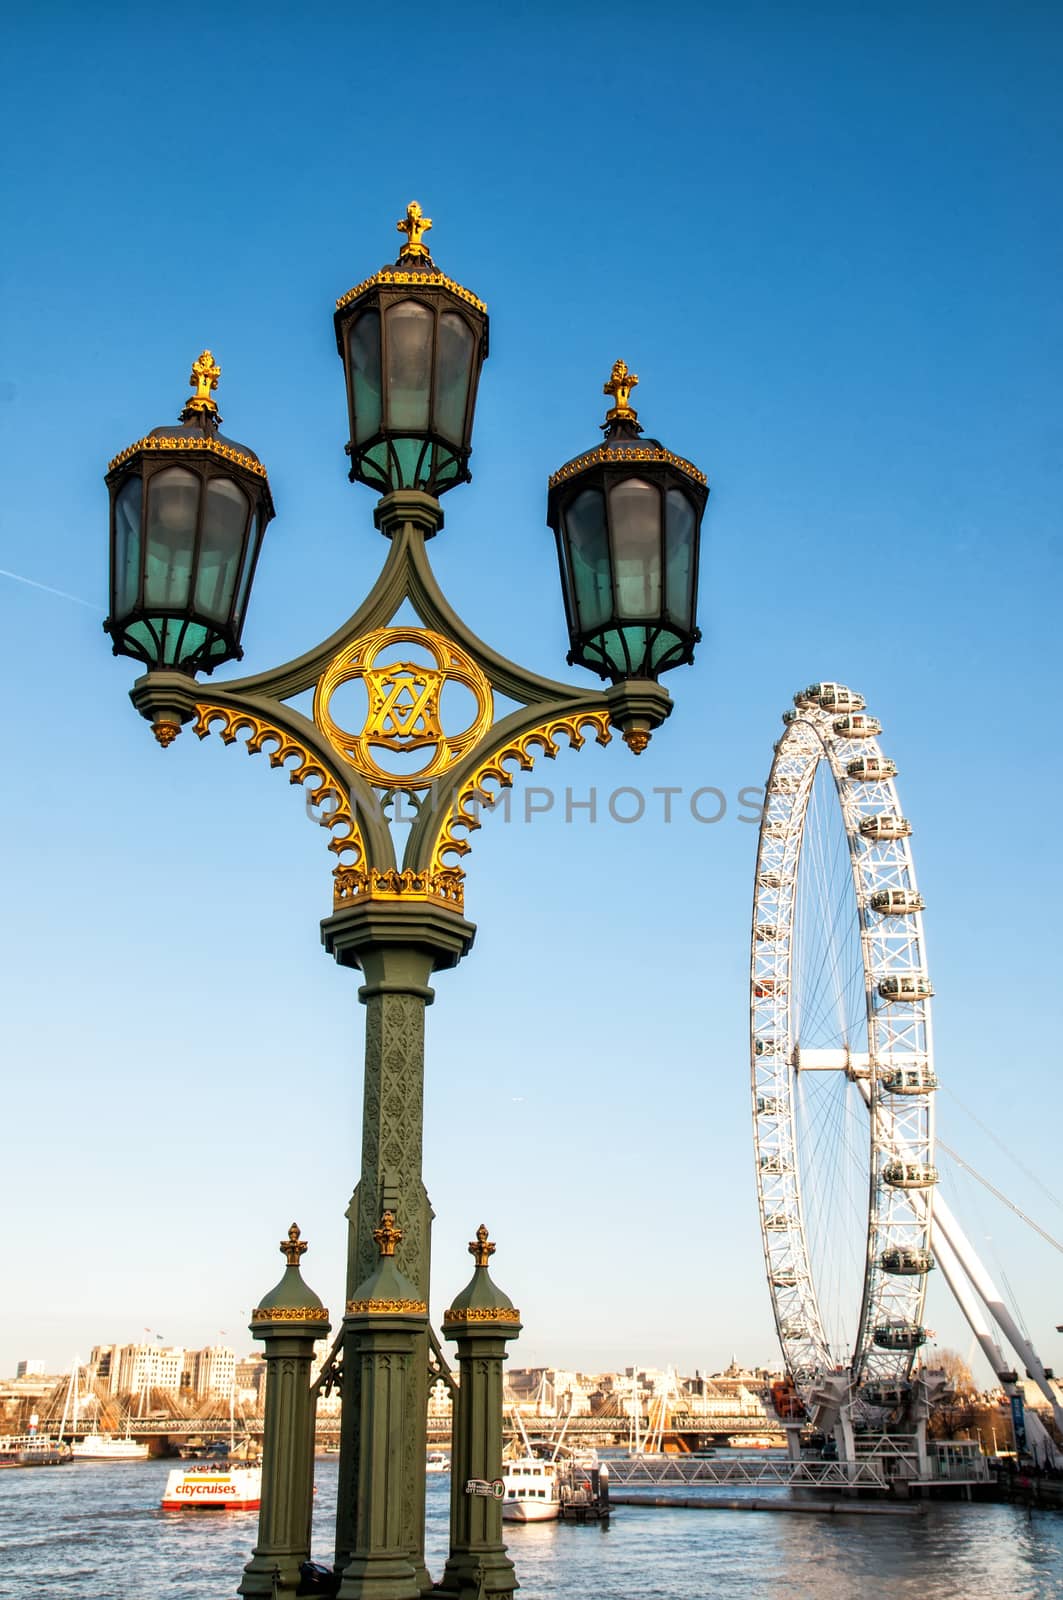 London Eye (135 m tall, diameter of 120 m) - a famous tourist attraction over river Thames